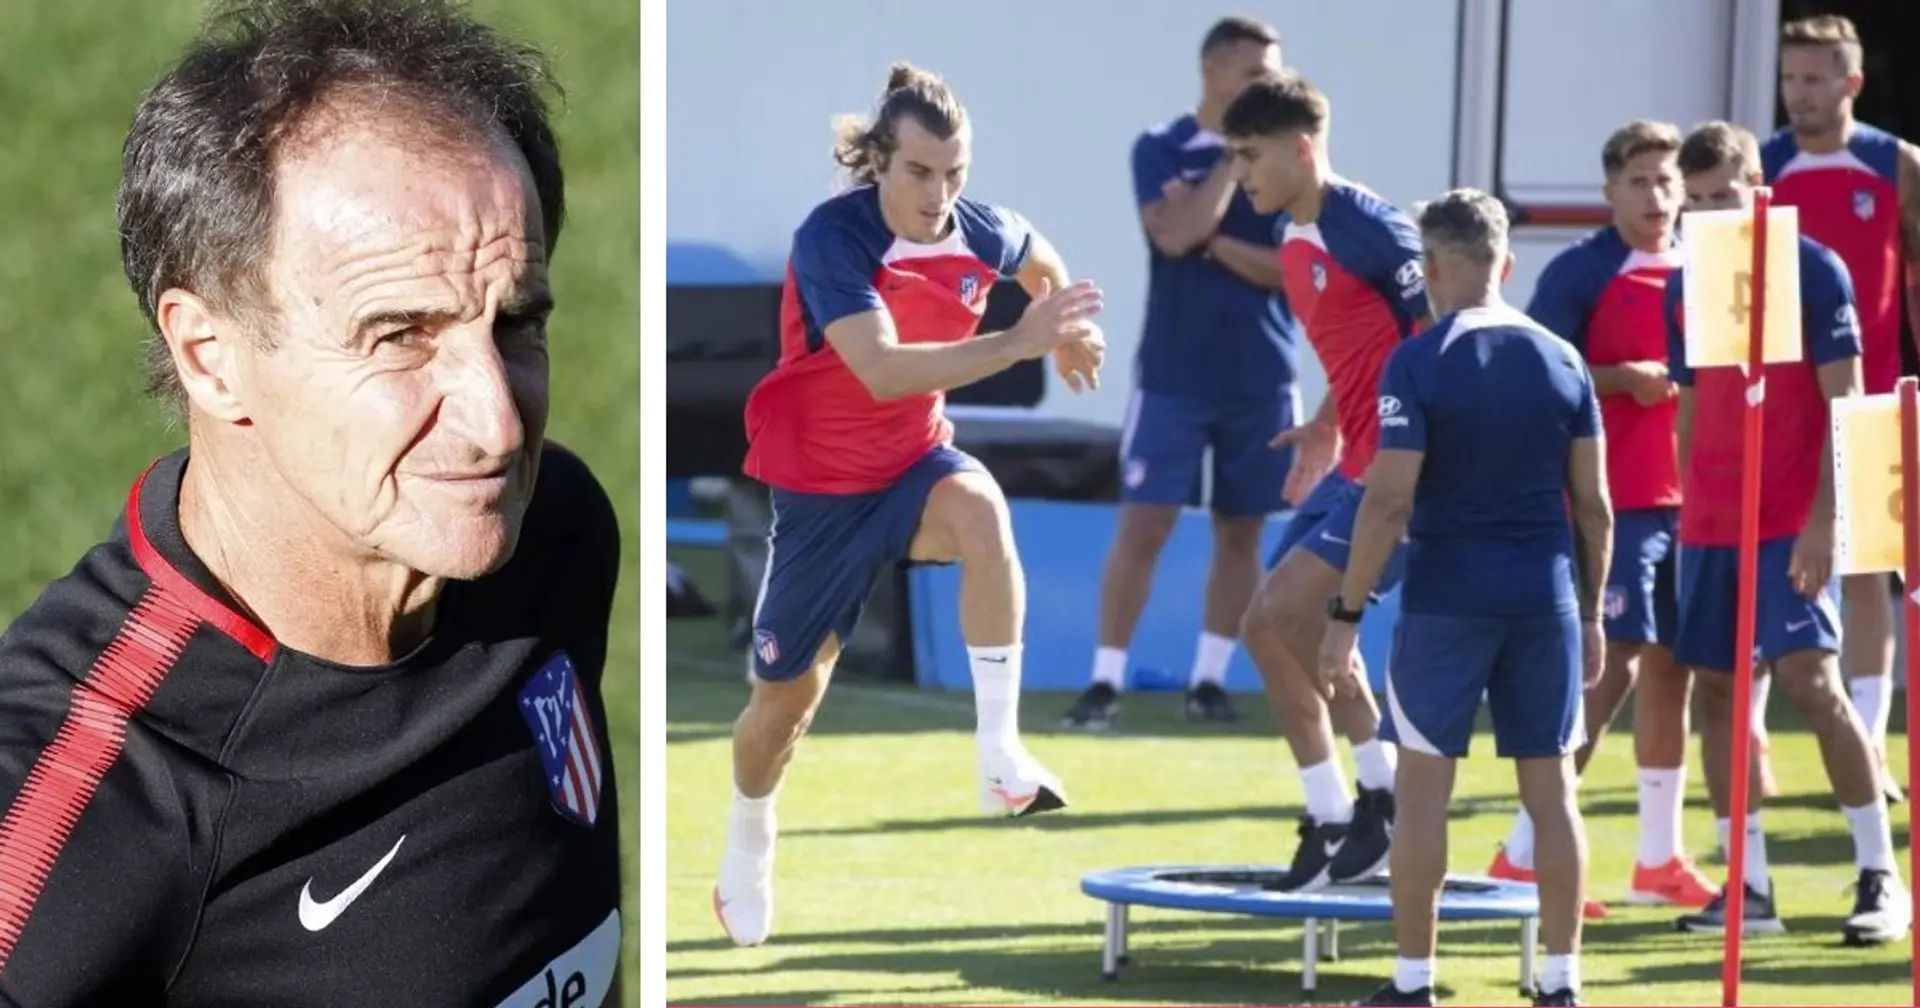 Atletico's latest signing breezes past tests by 'sadist' coach who 'makes new players puke'